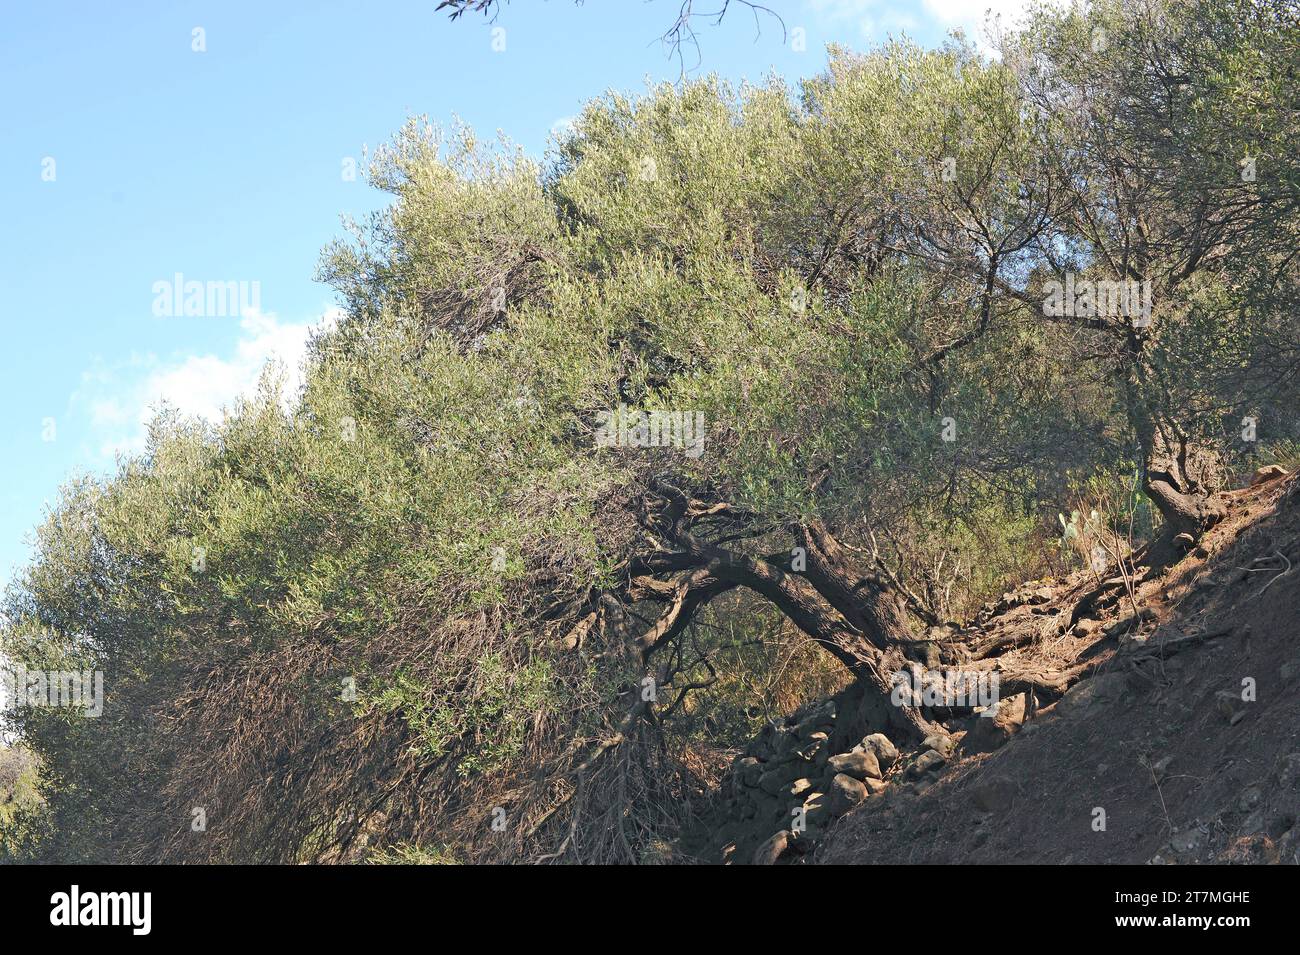 Acebuche canario (Olea cerasiformis or Olea europaea guanchica) is a tree endemic to Canary Islands. This photo was taken in Gran Canaria. Stock Photo